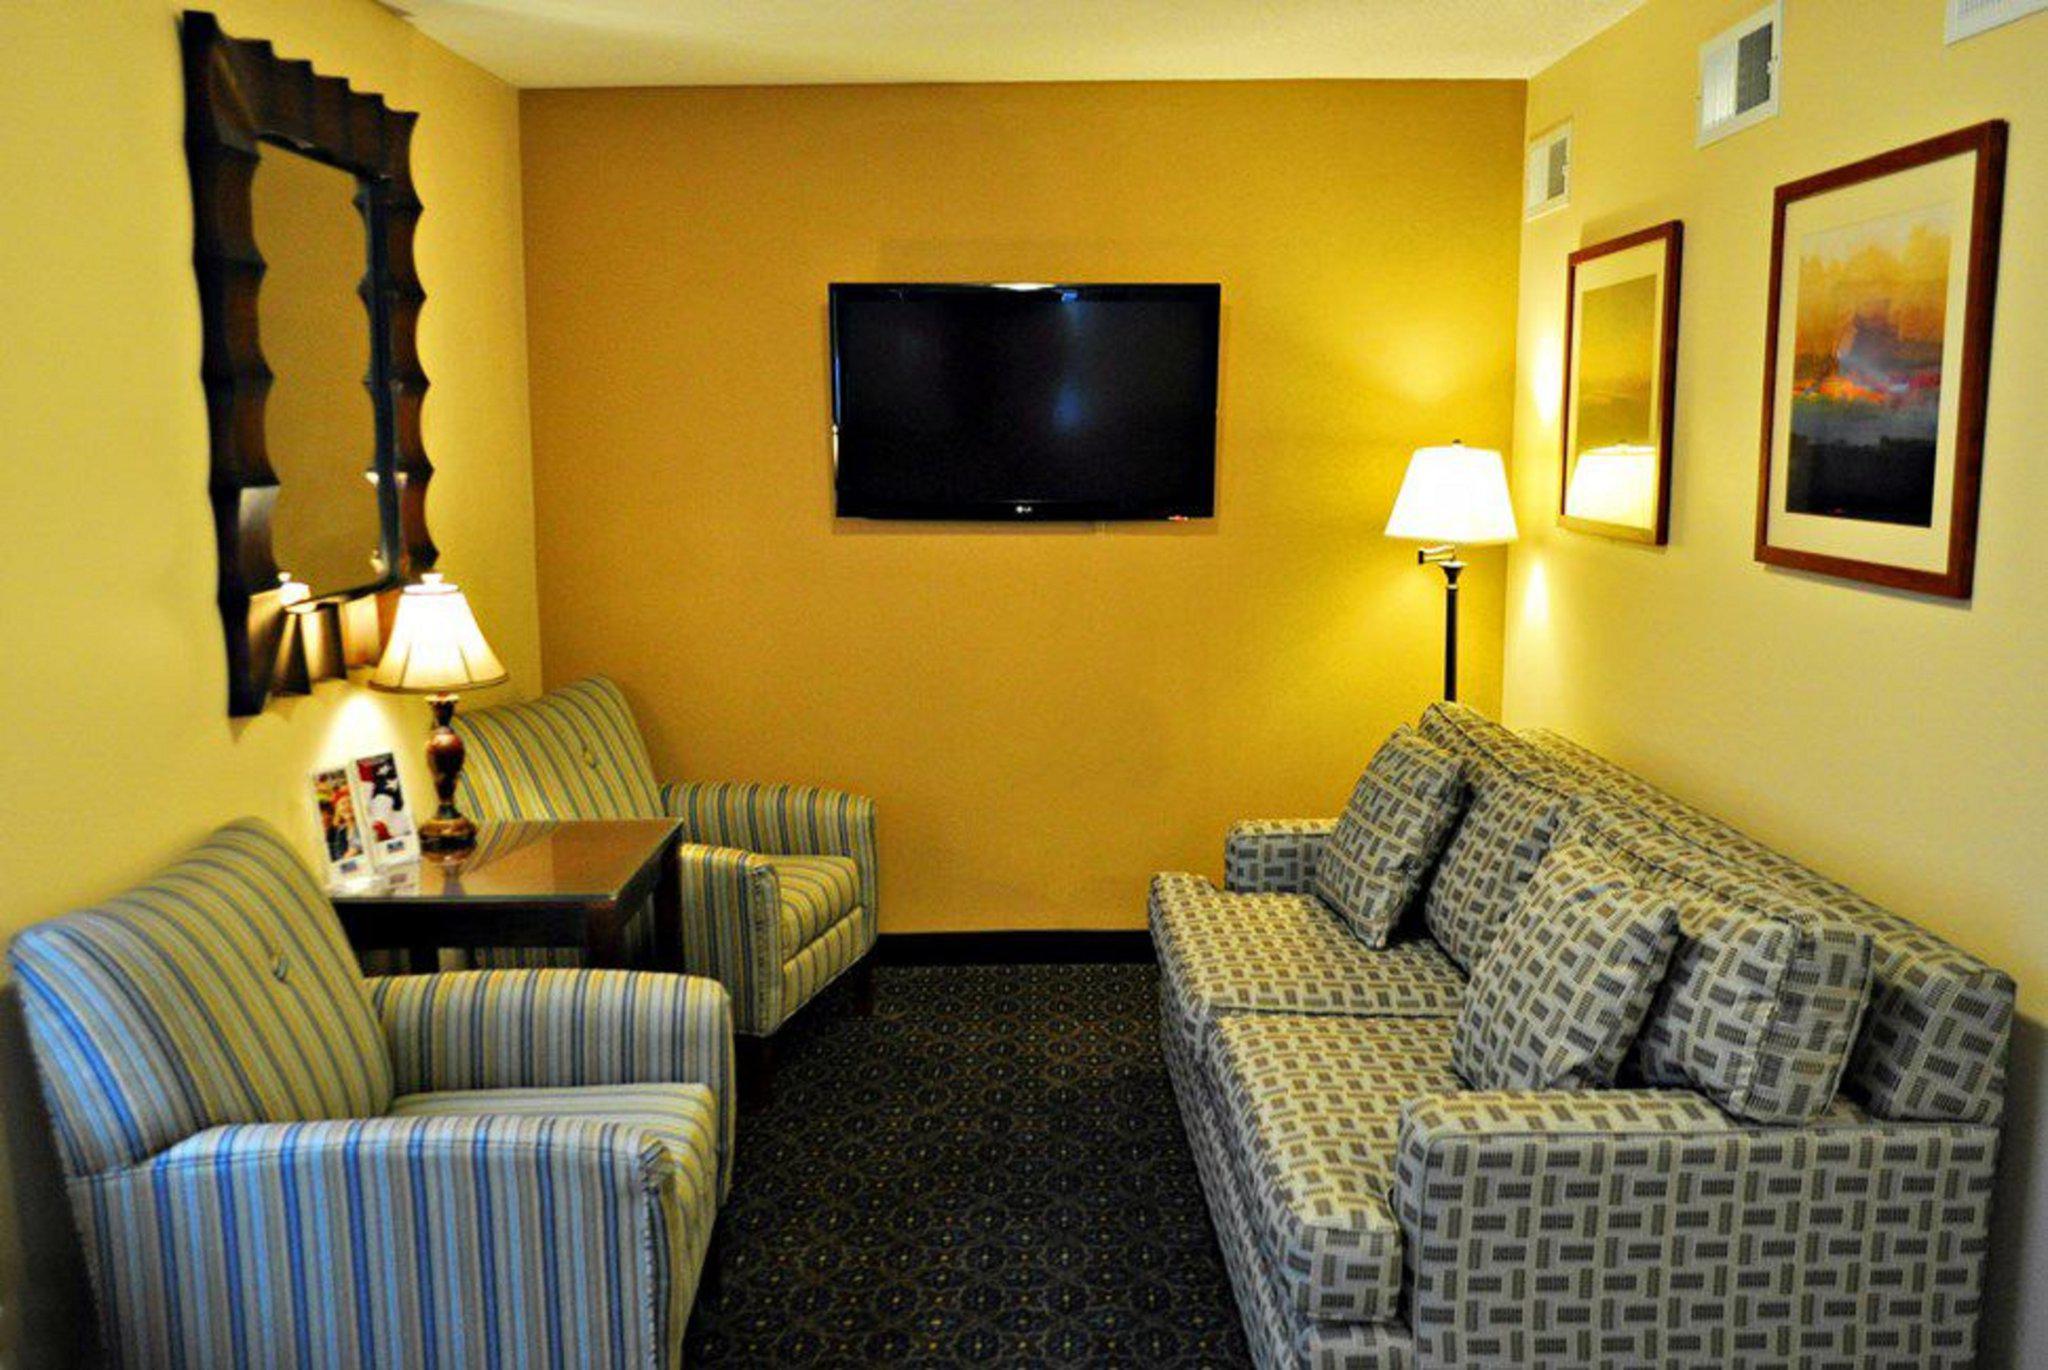 Candlewood Suites Raleigh Crabtree Photo